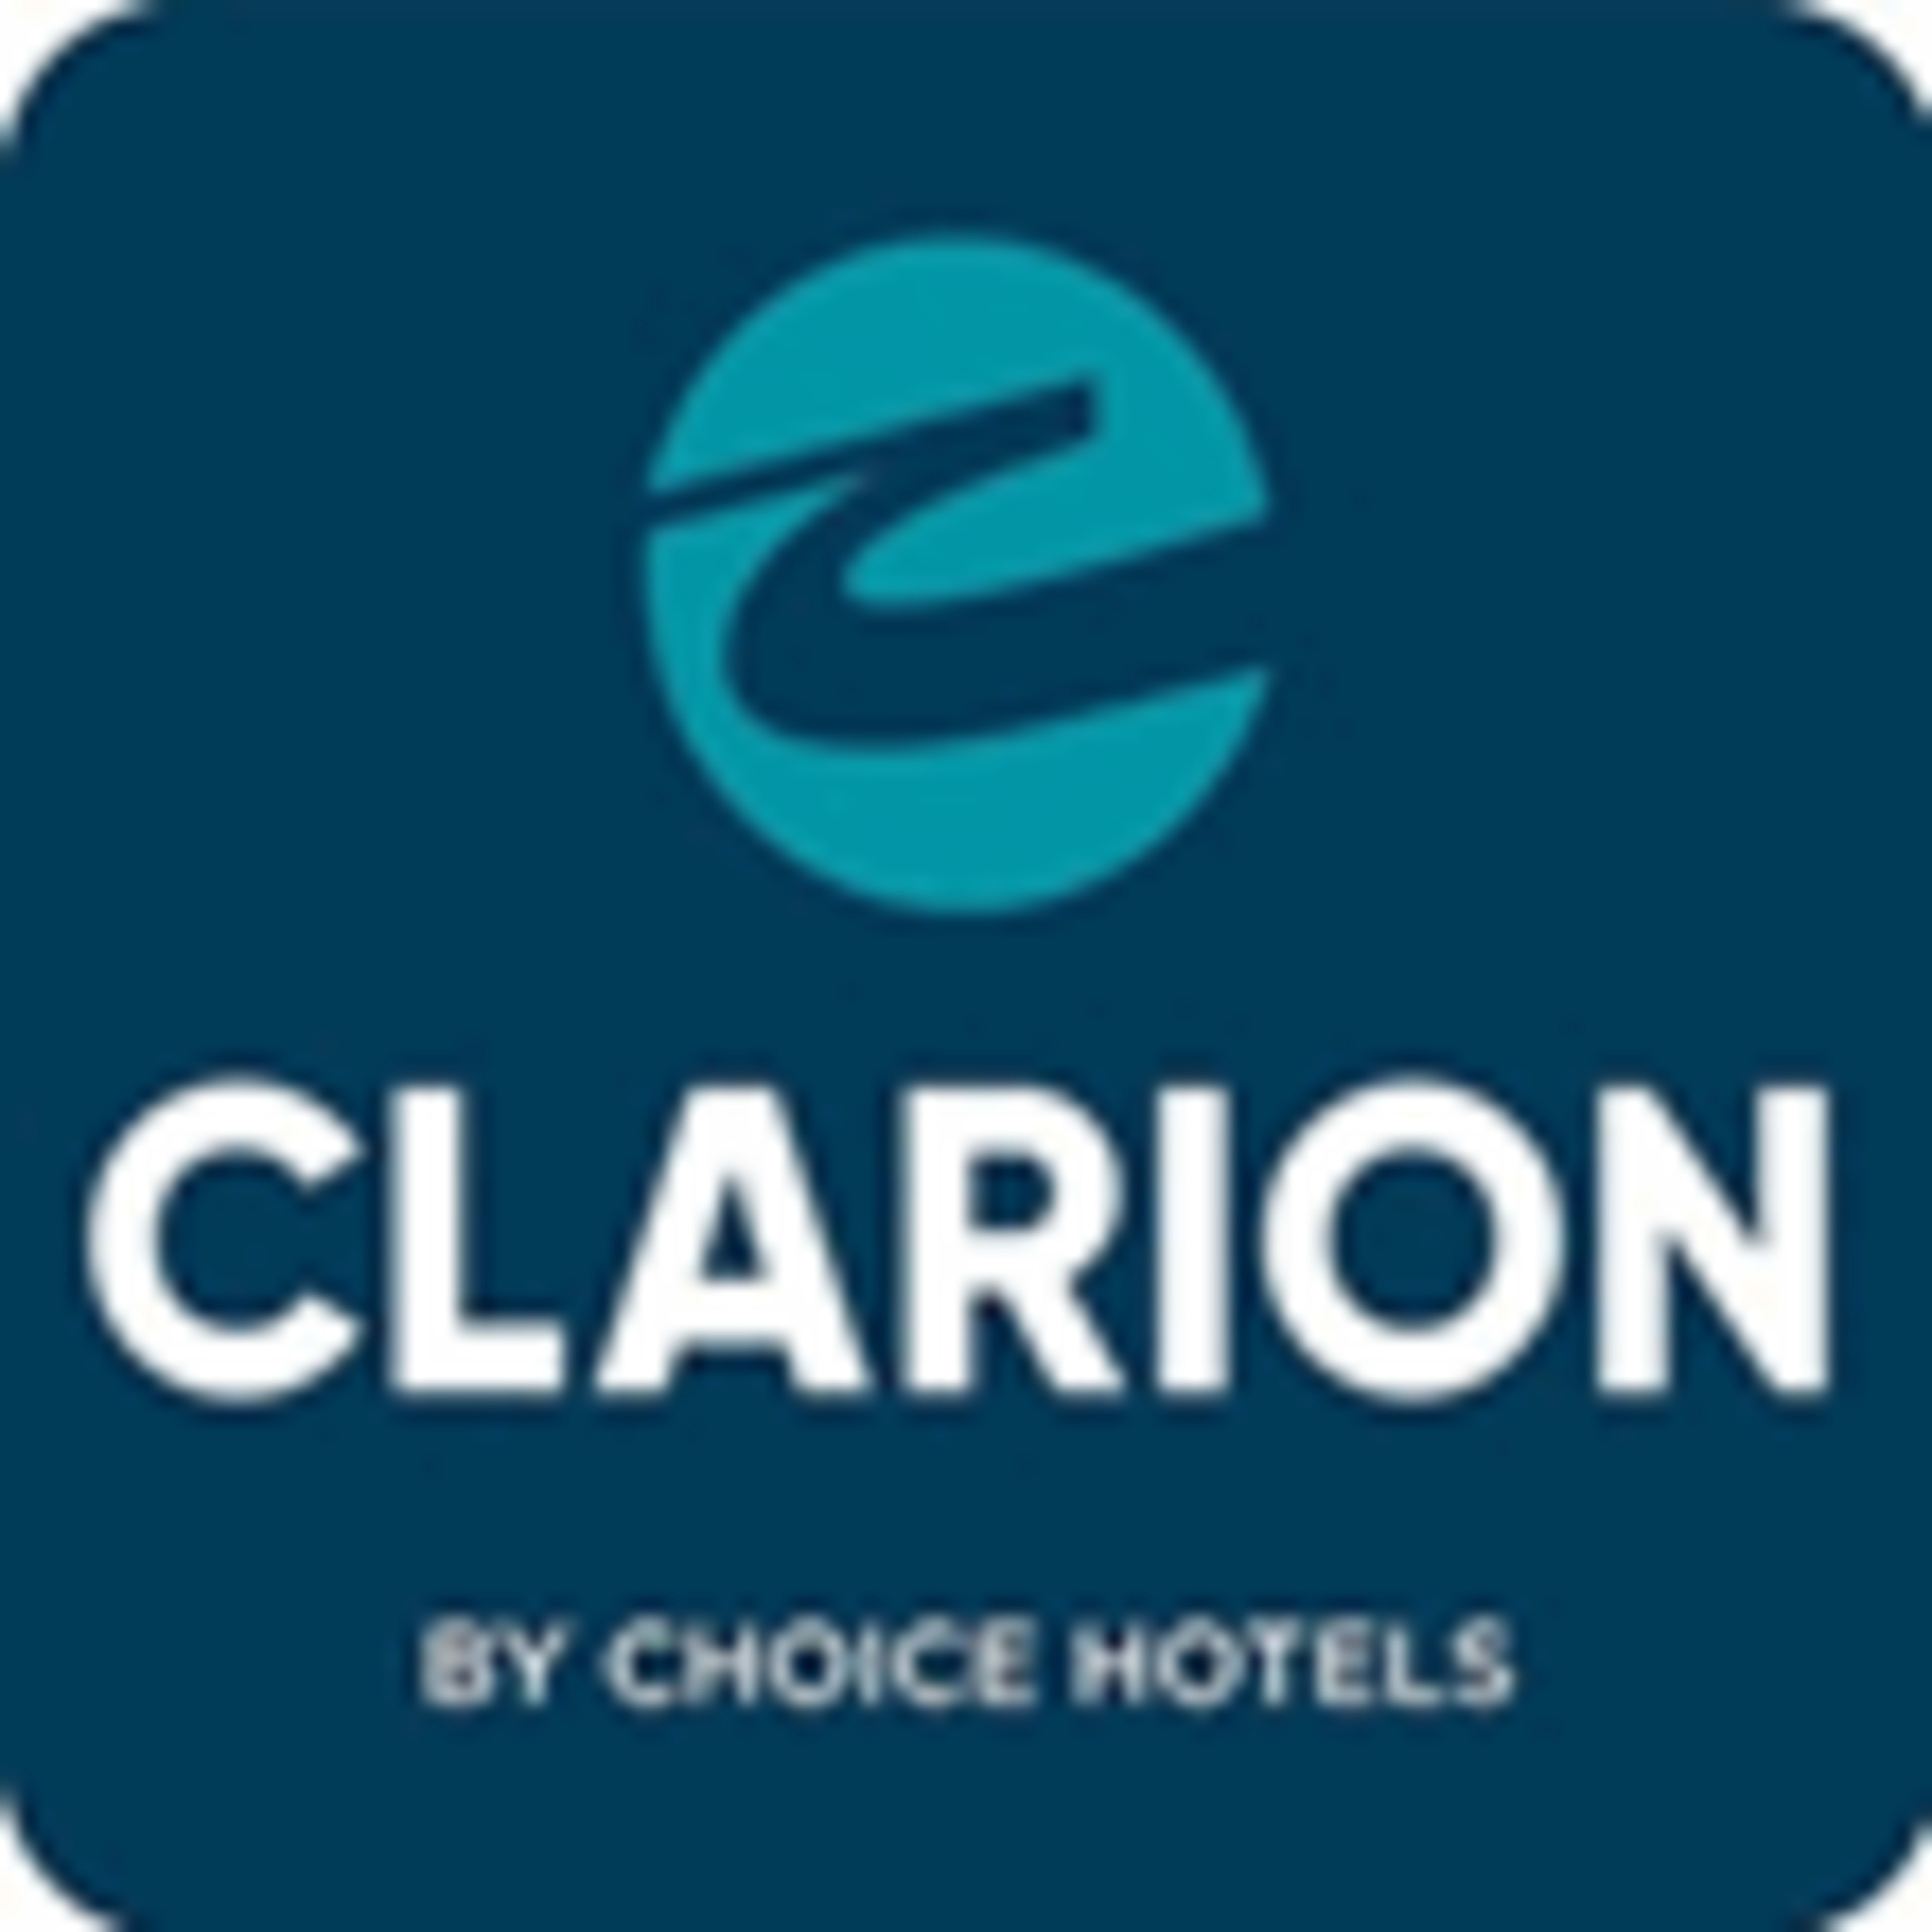 Clarion Hotels Code